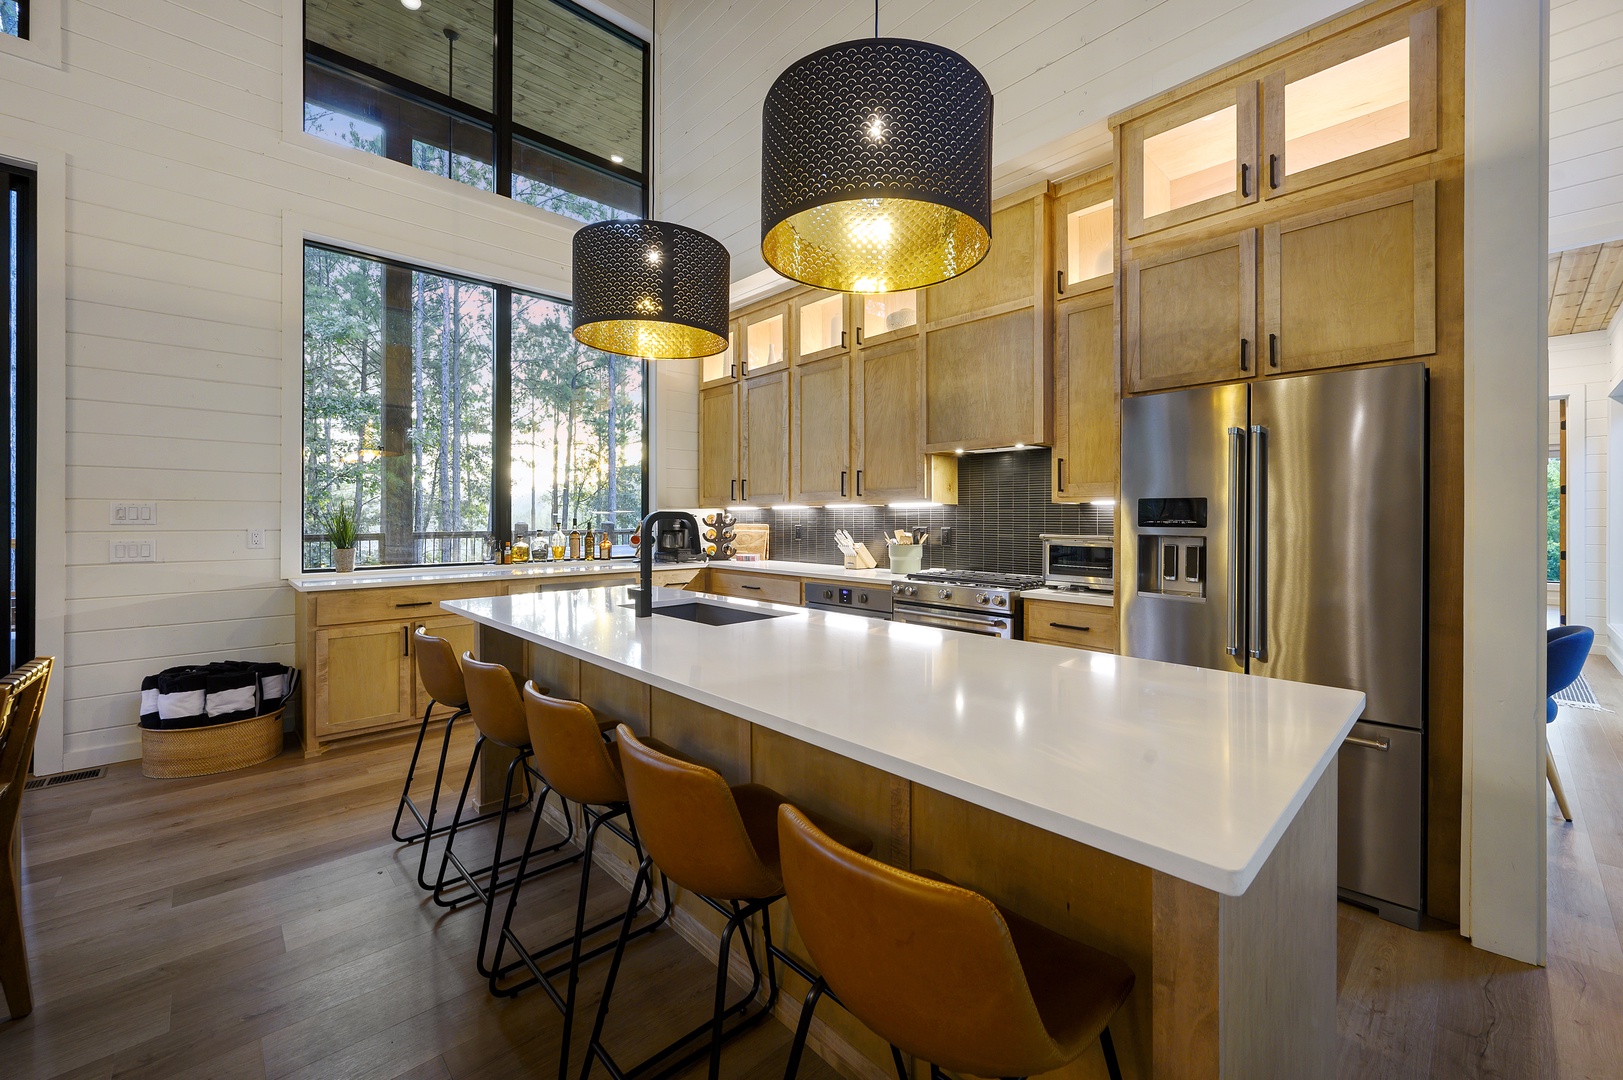 Large kitchen island is perfect for preparing meals during your stay